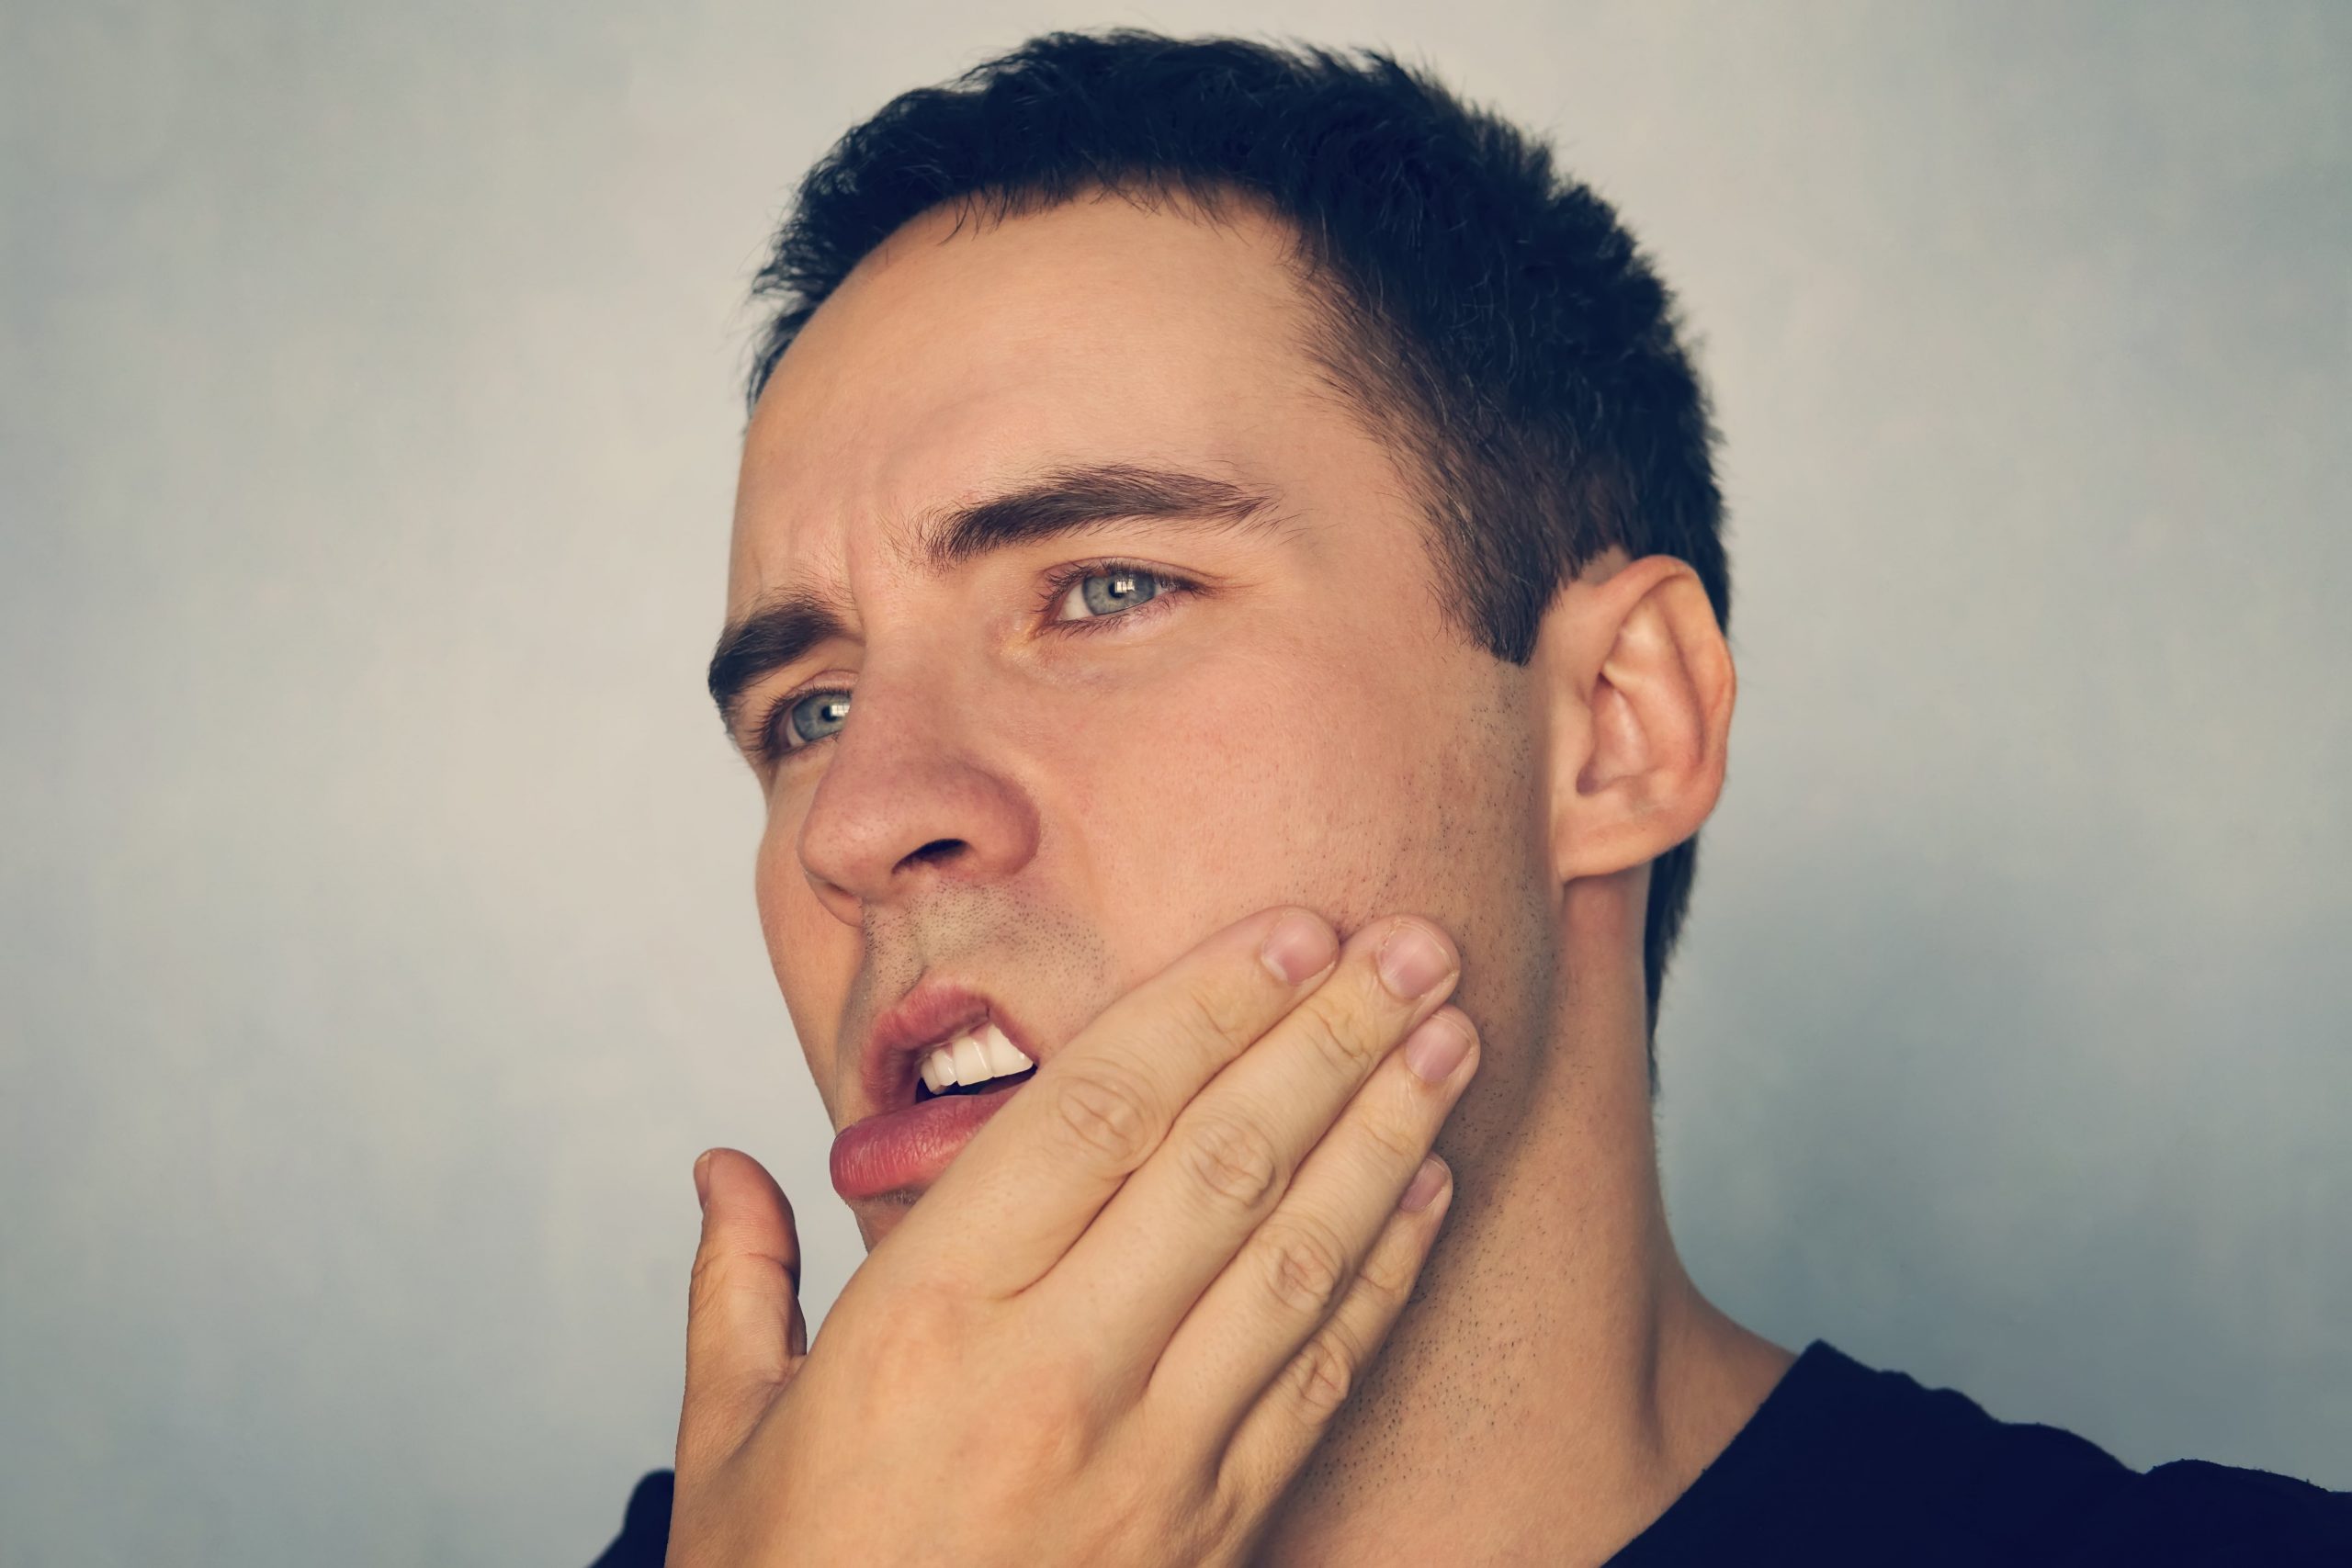 Man with jaw pain pressing hand to face.